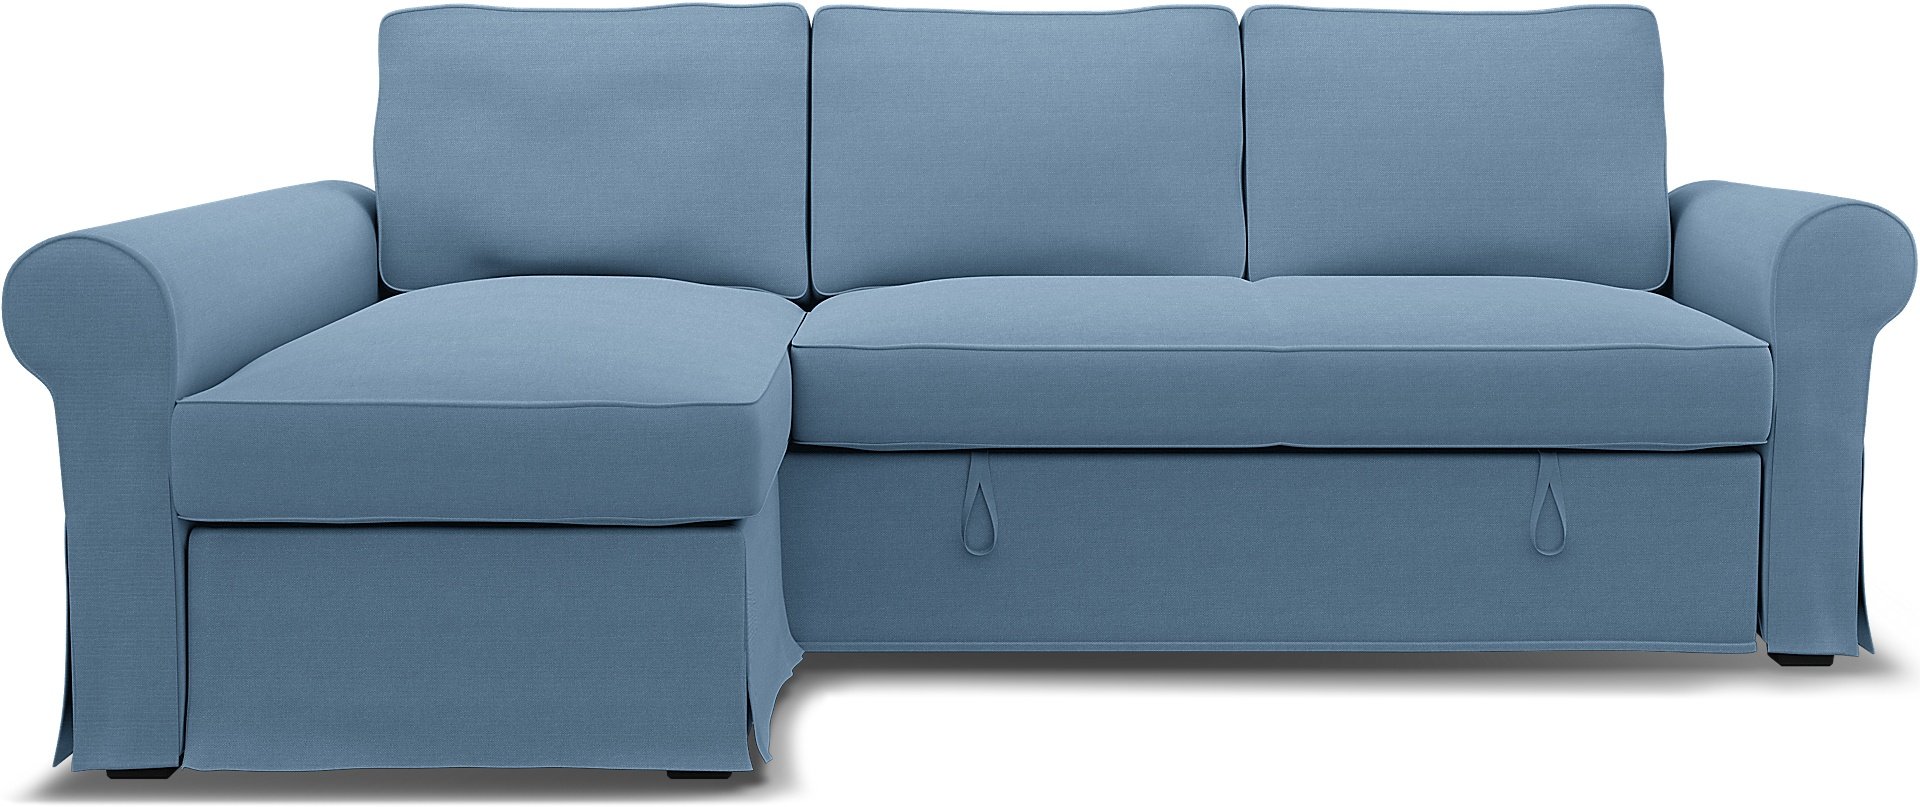 IKEA - Backabro Sofabed with Chaise Cover, Vintage Blue, Linen - Bemz